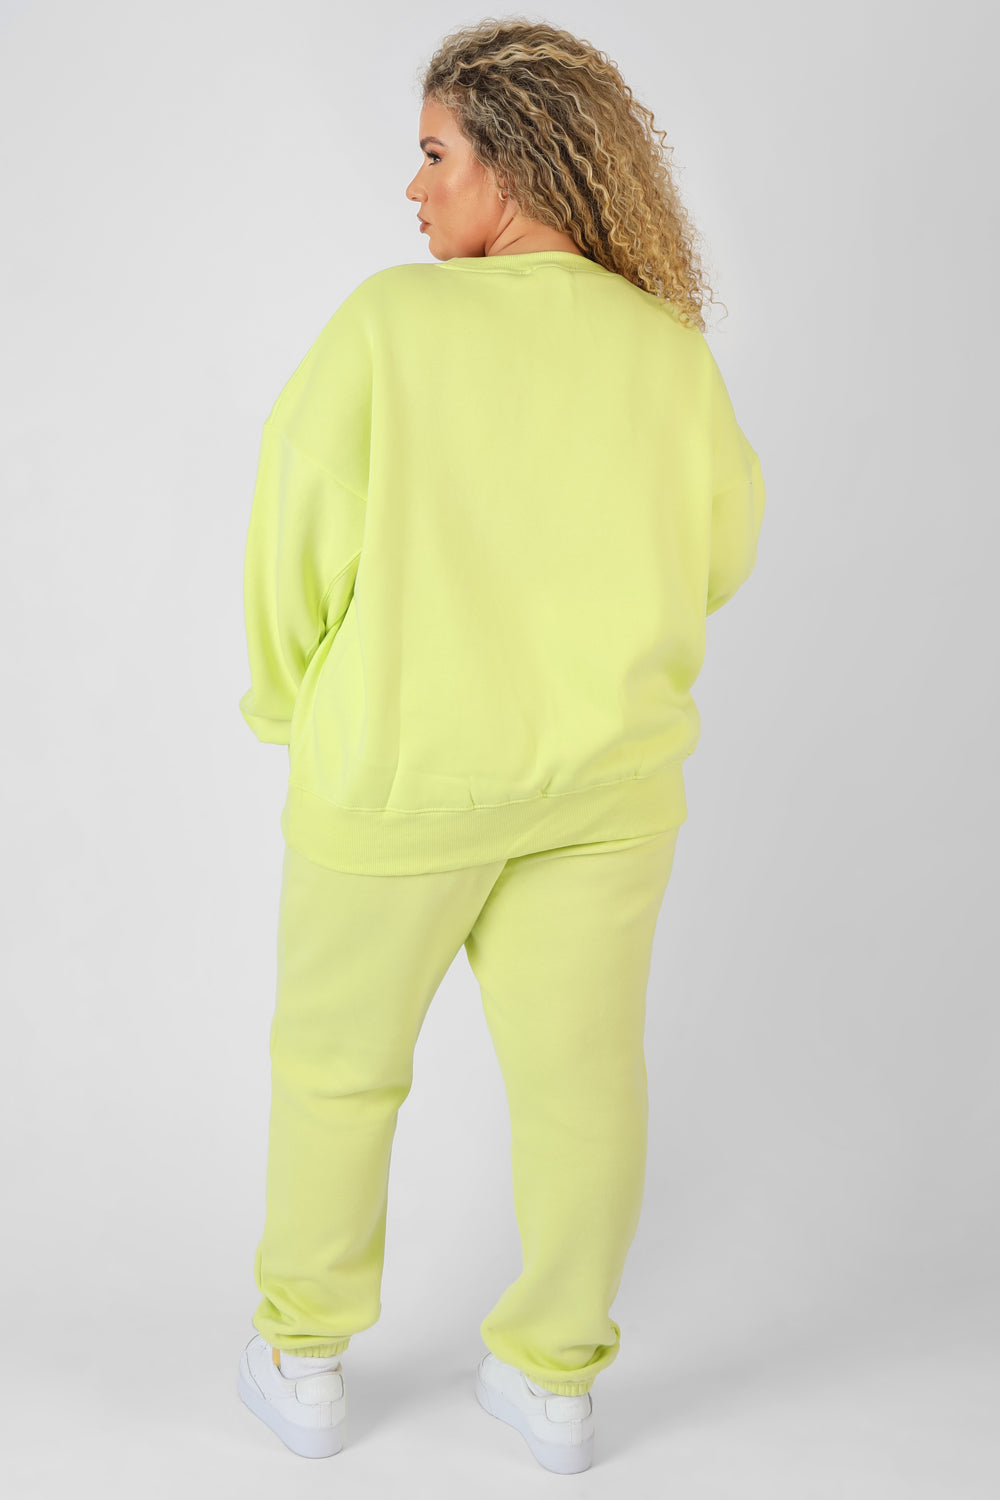 CURVE TEXT DETAIL OVERSIZED SWEAT LIME